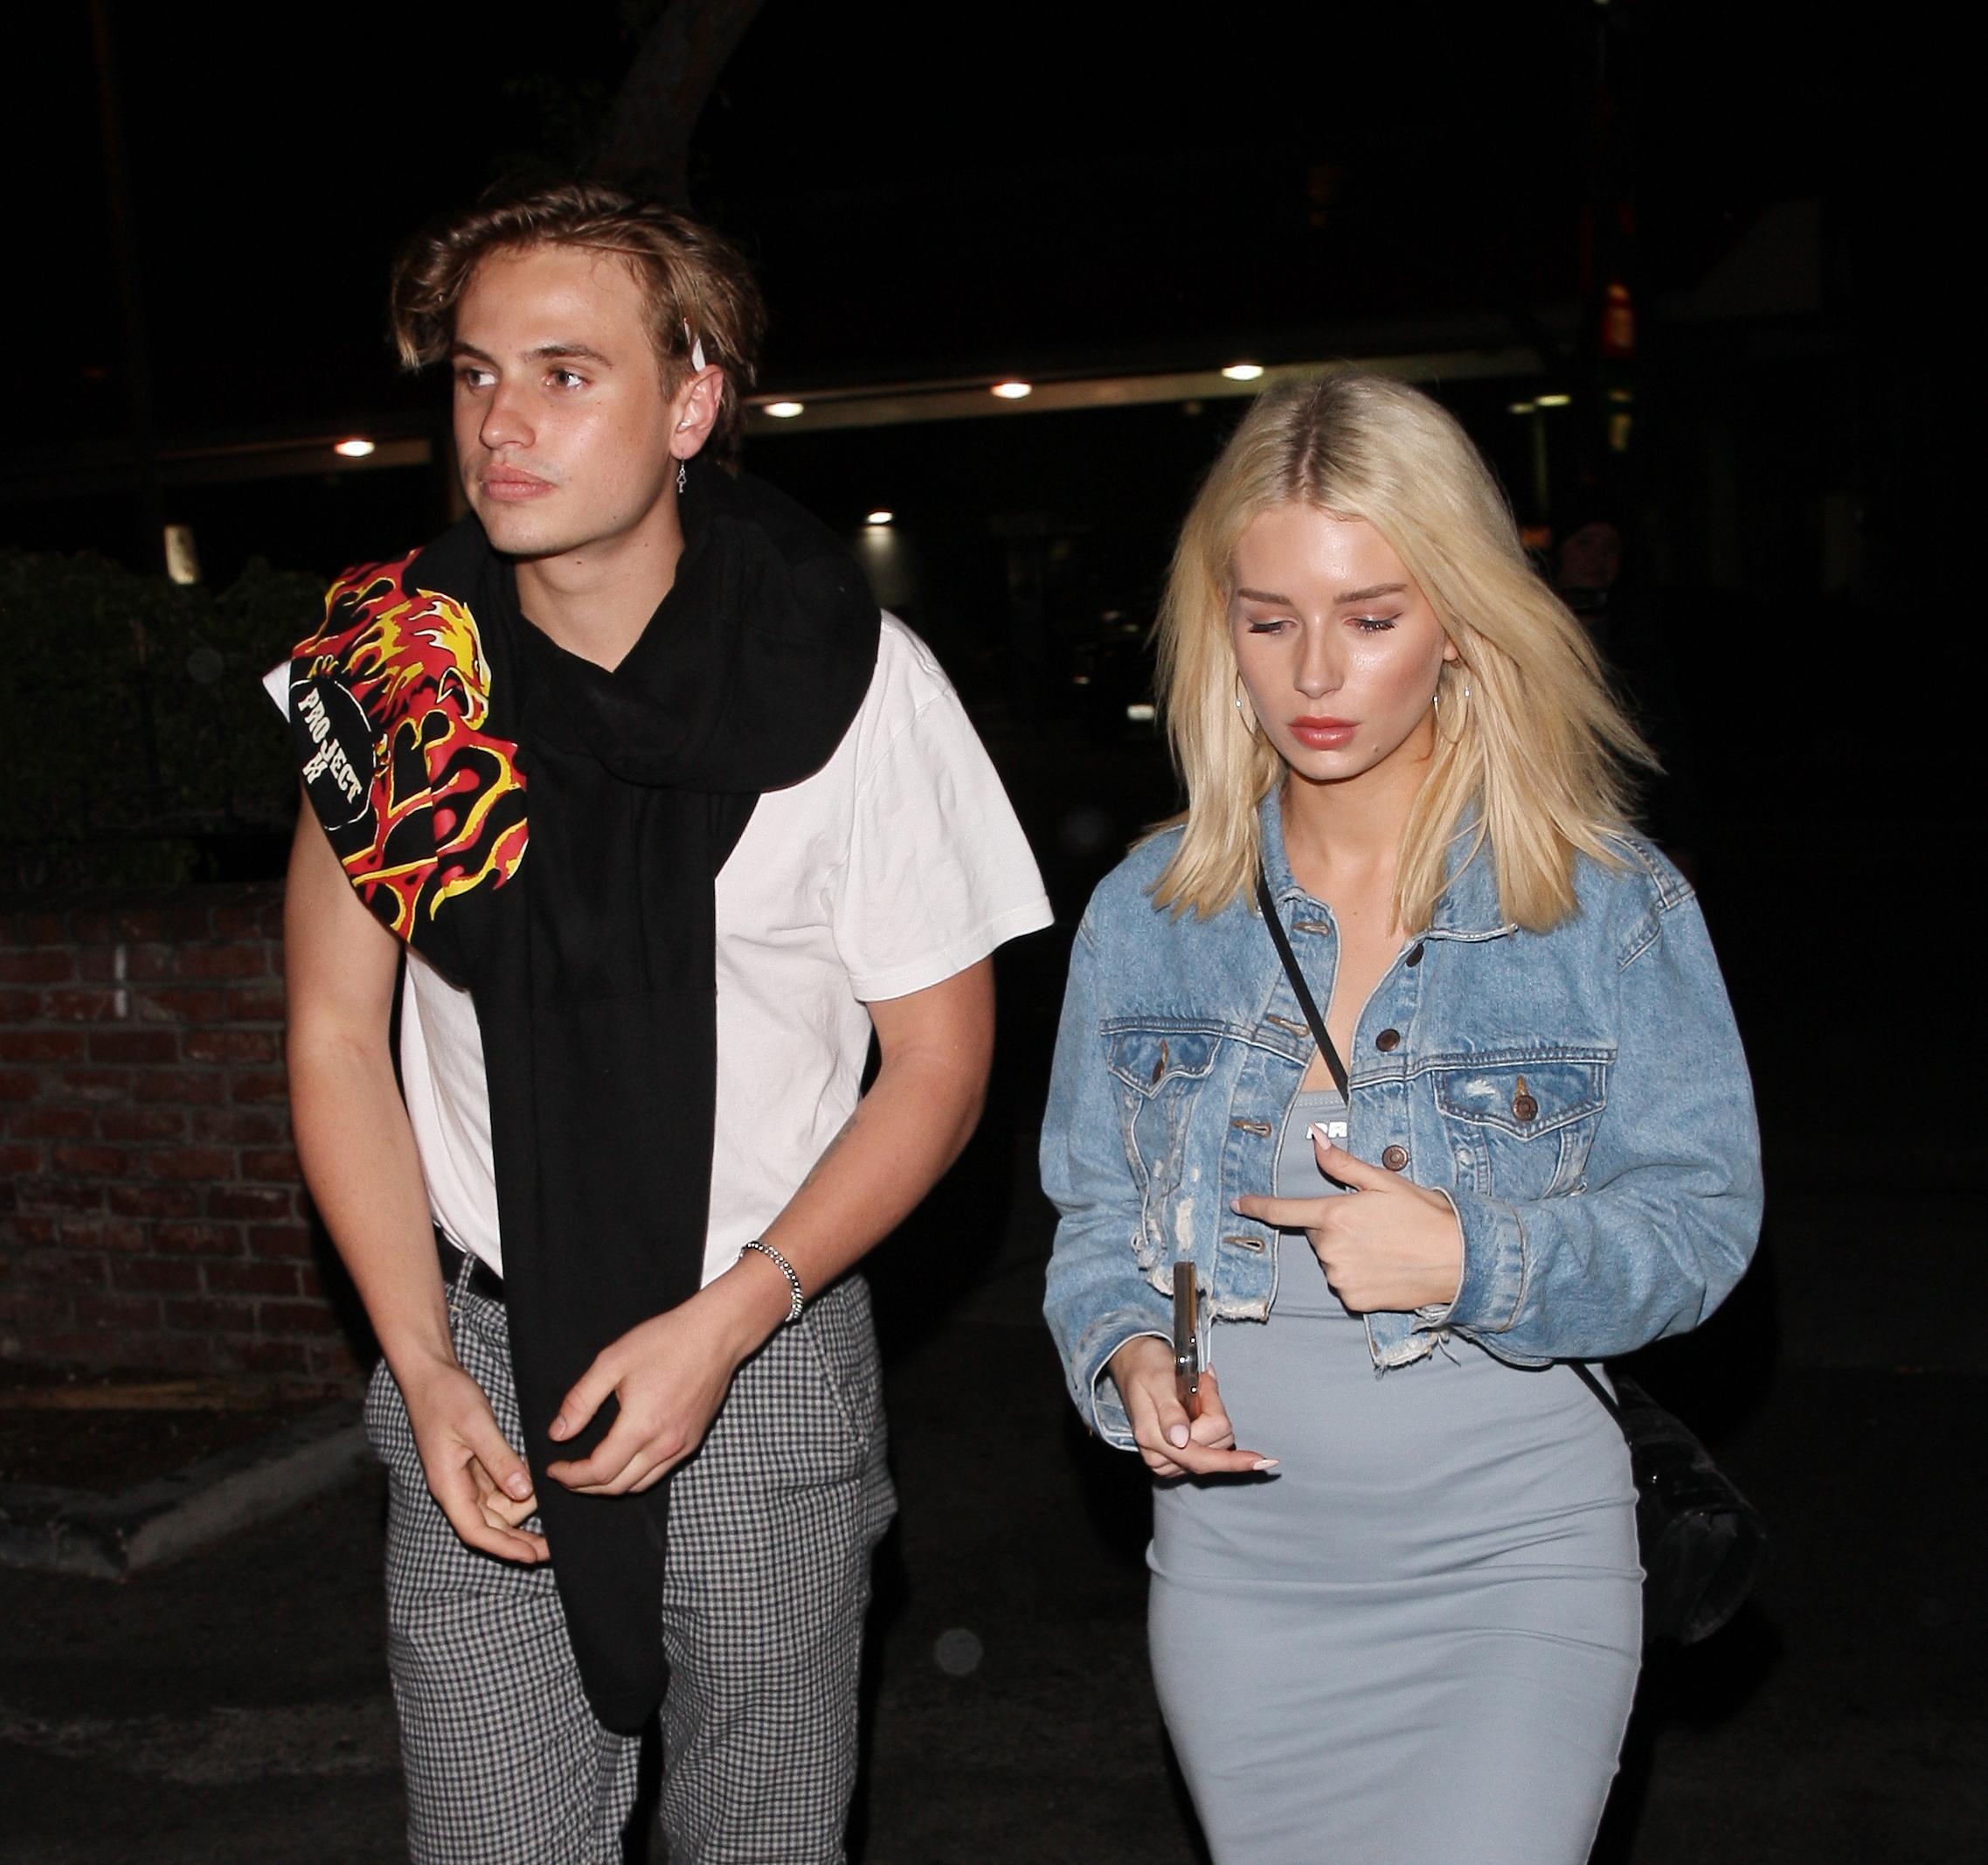 Lottie Moss and Daniel Mickelson are spotted leaving the Delilah restaurant after partying